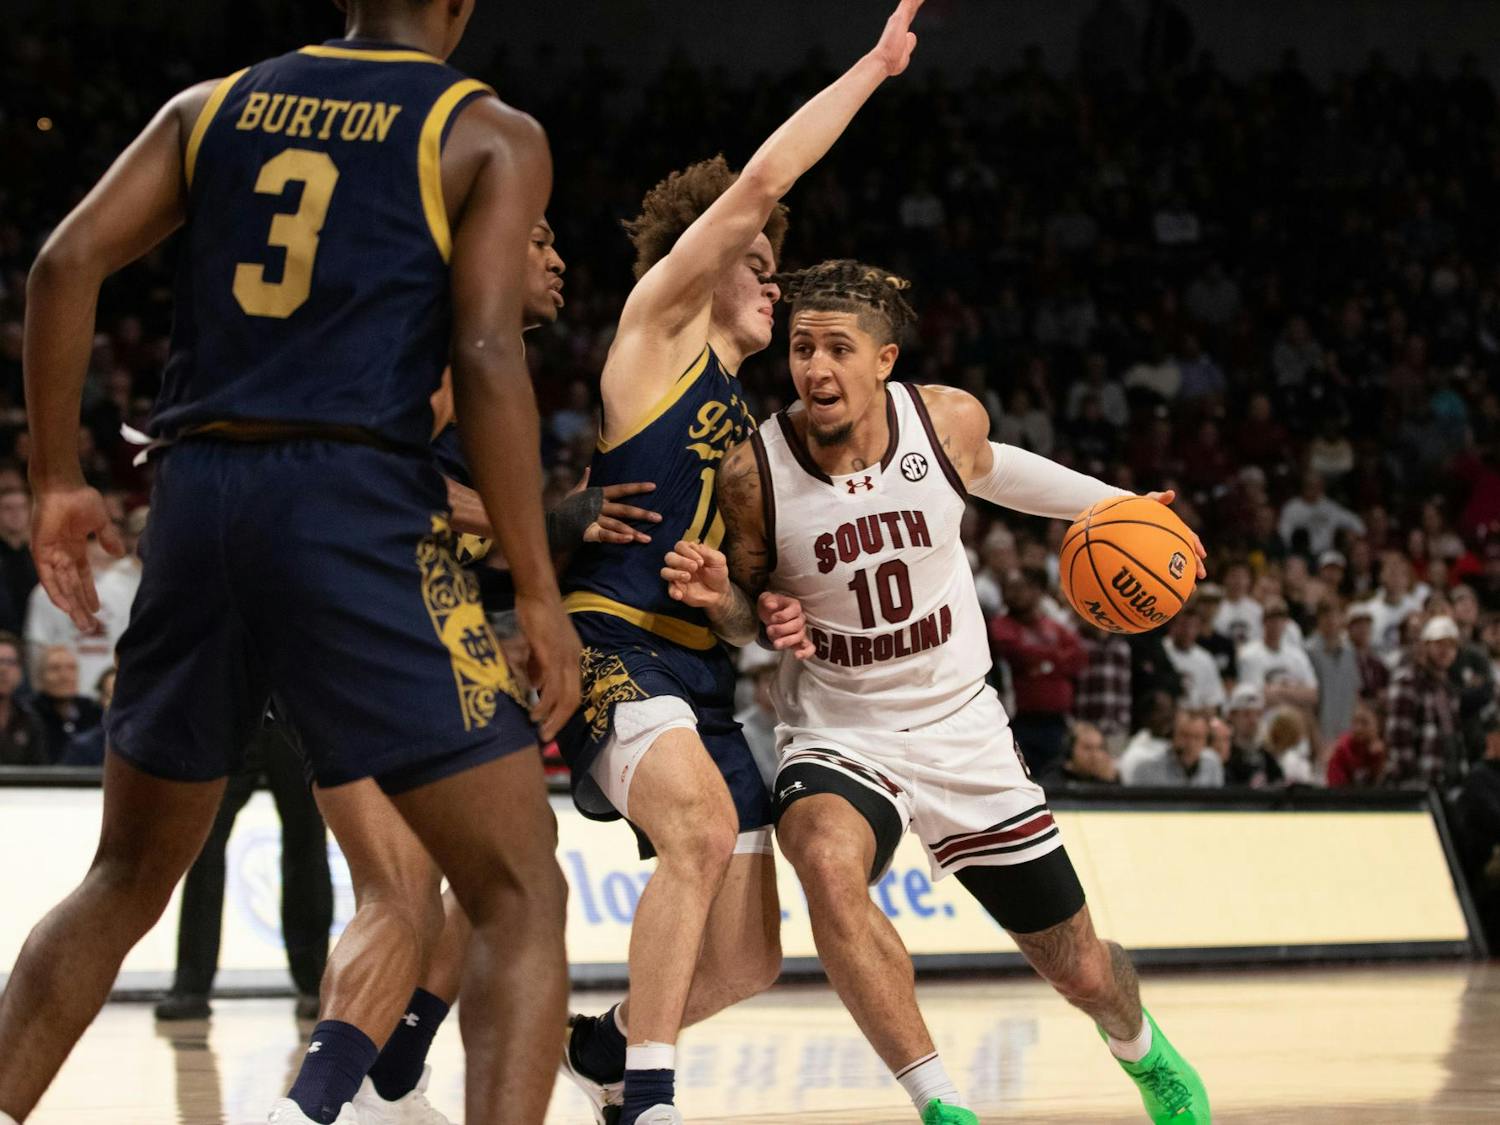 Junior guard Myles Stute drives into a trio of Notre Dame defenders at Colonial Life Arena on Nov. 28, 2023. The Gamecocks won the game 65-53, but Stute struggled with just 1 point on 0-5 shooting.